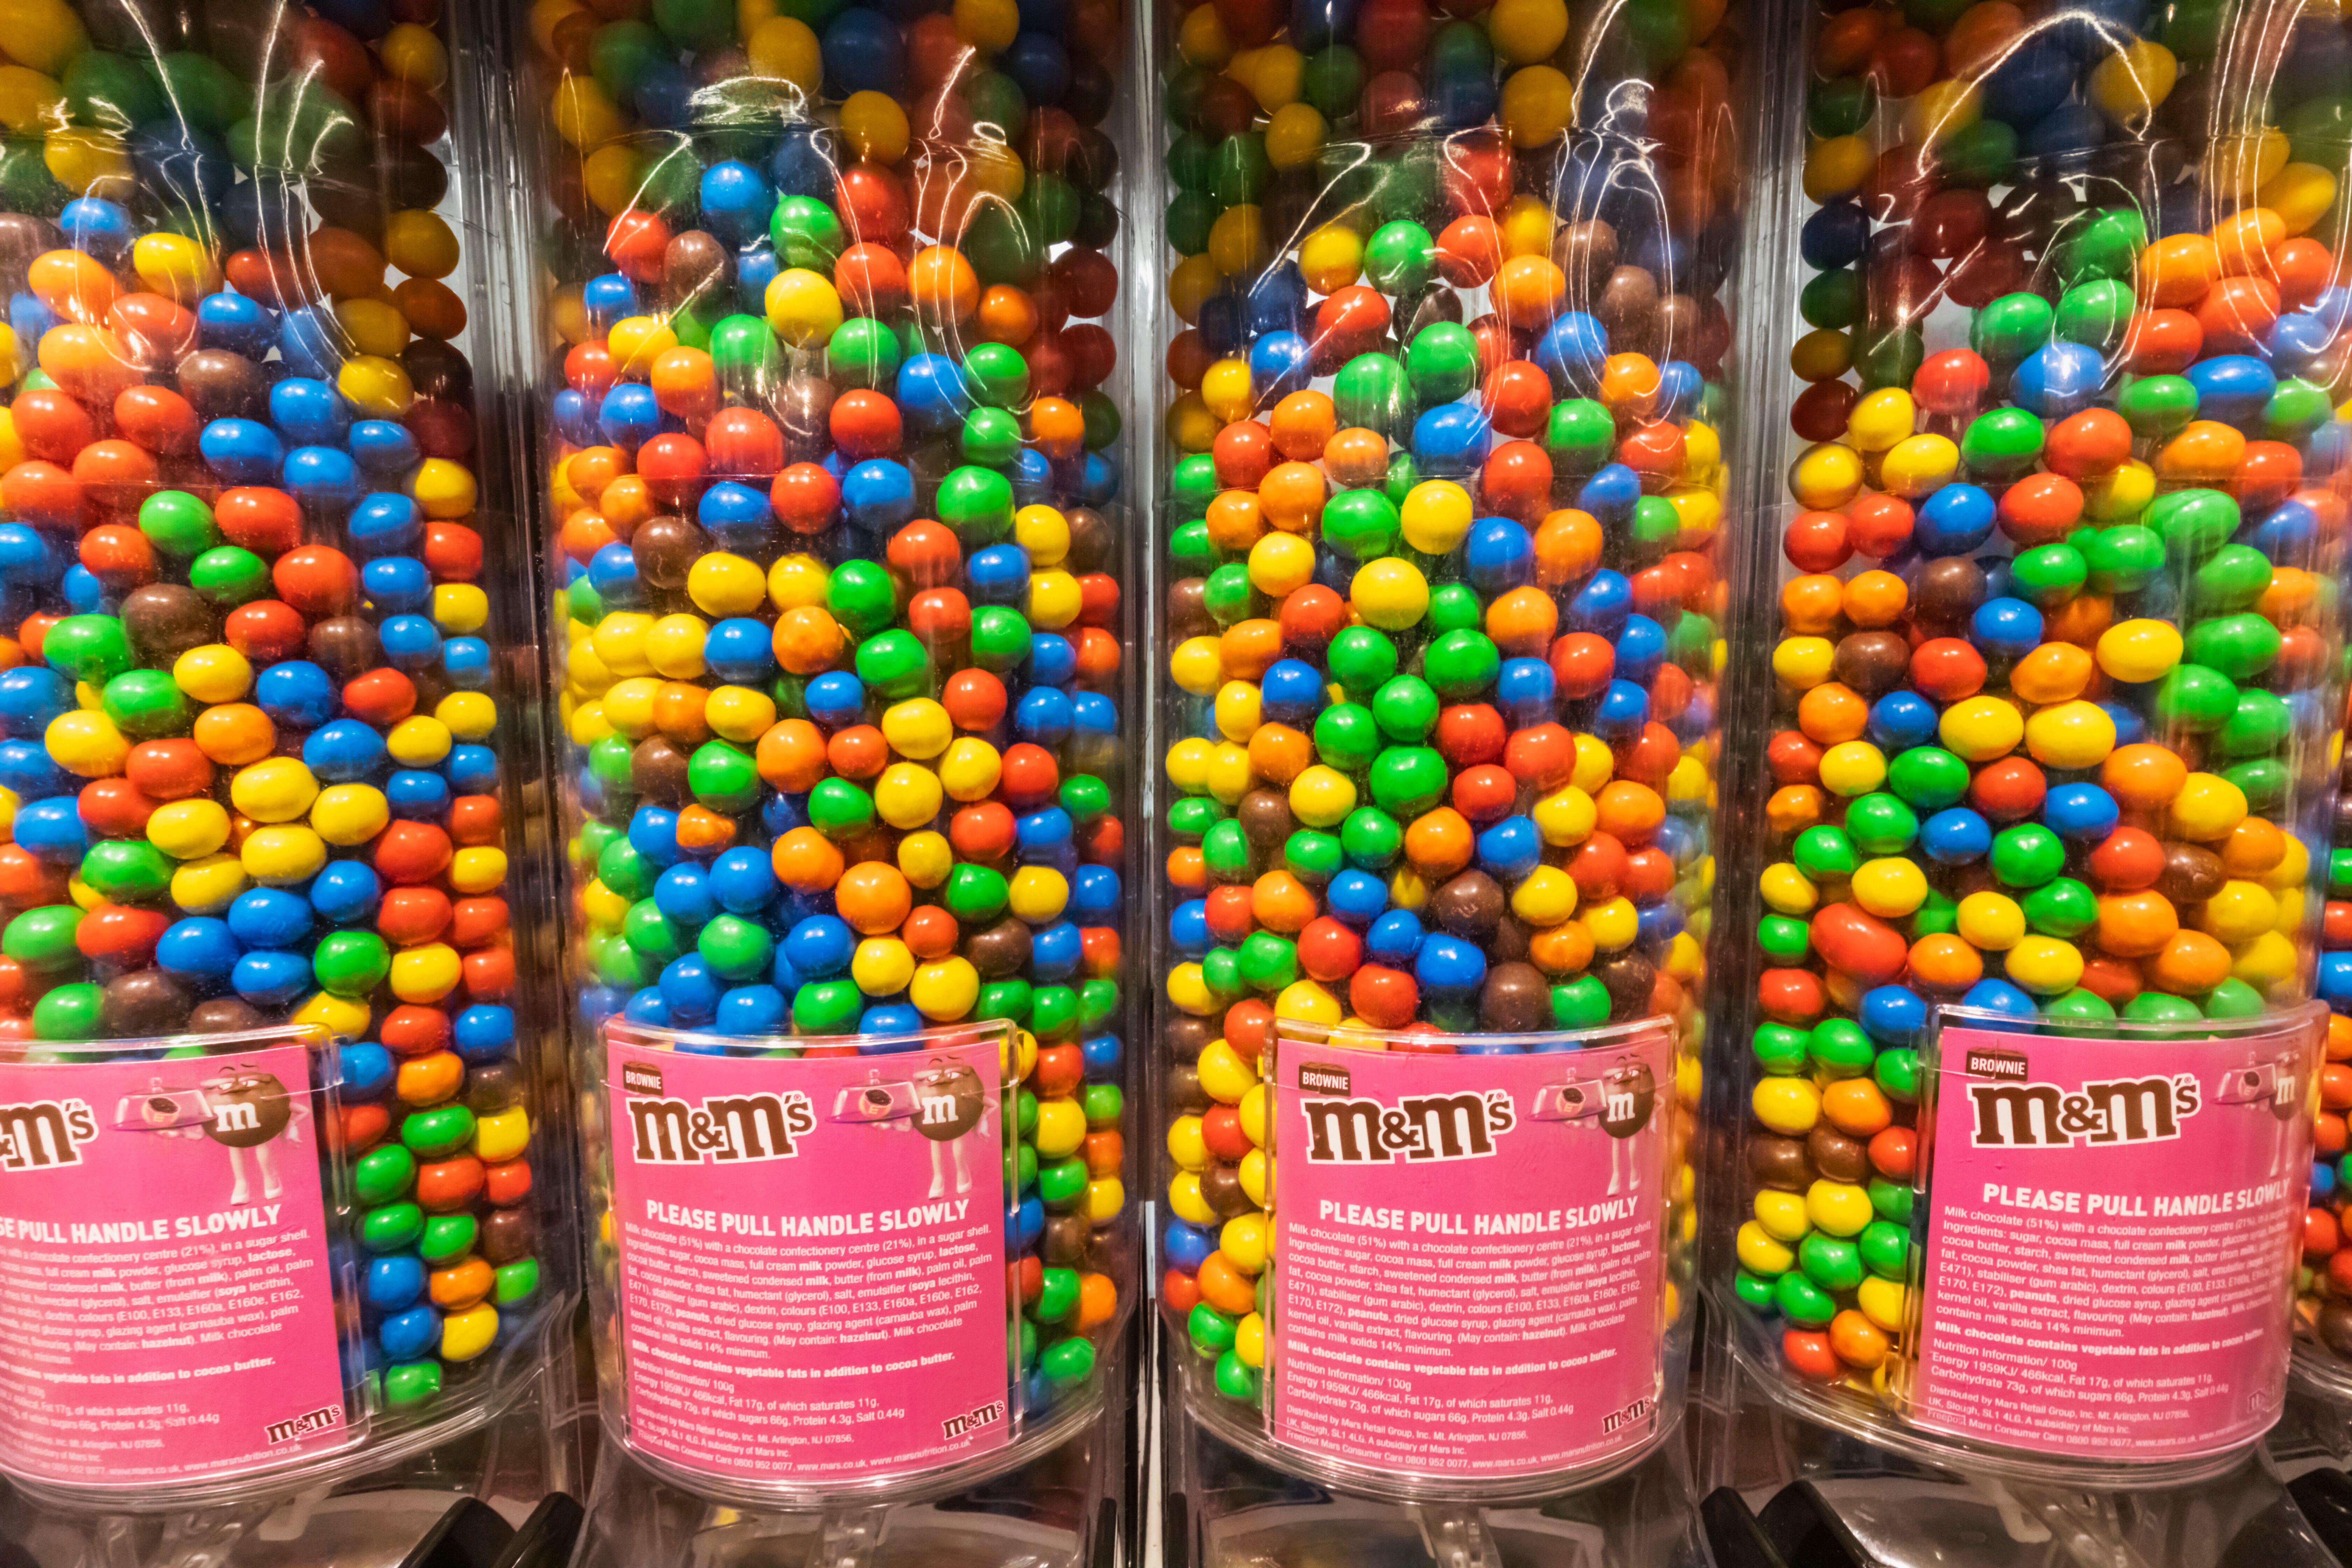 People only just realising what 'M&M's' stands for and where the sweets are  from - Nottinghamshire Live